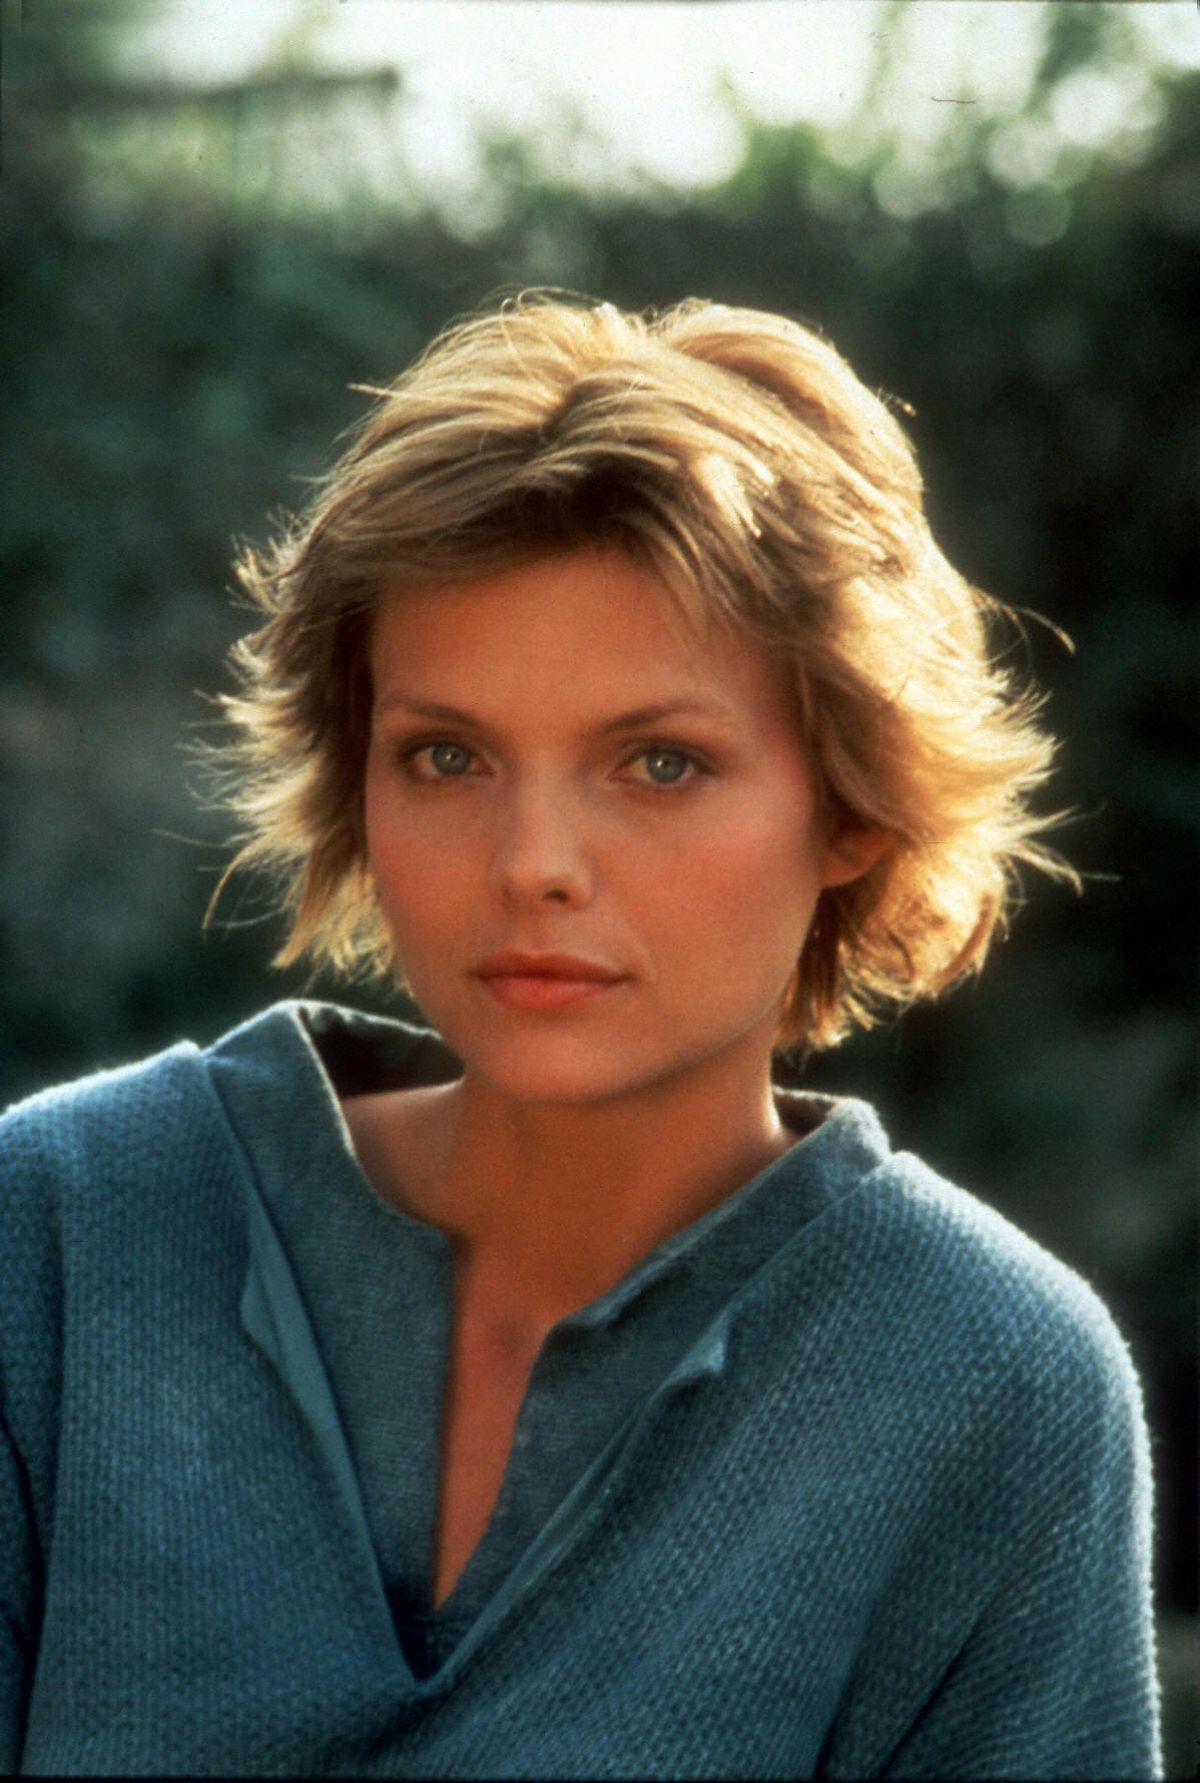 best-from-the-past-michelle-pfeiffer-for-ladyhawke-promord-1985_2.jpg